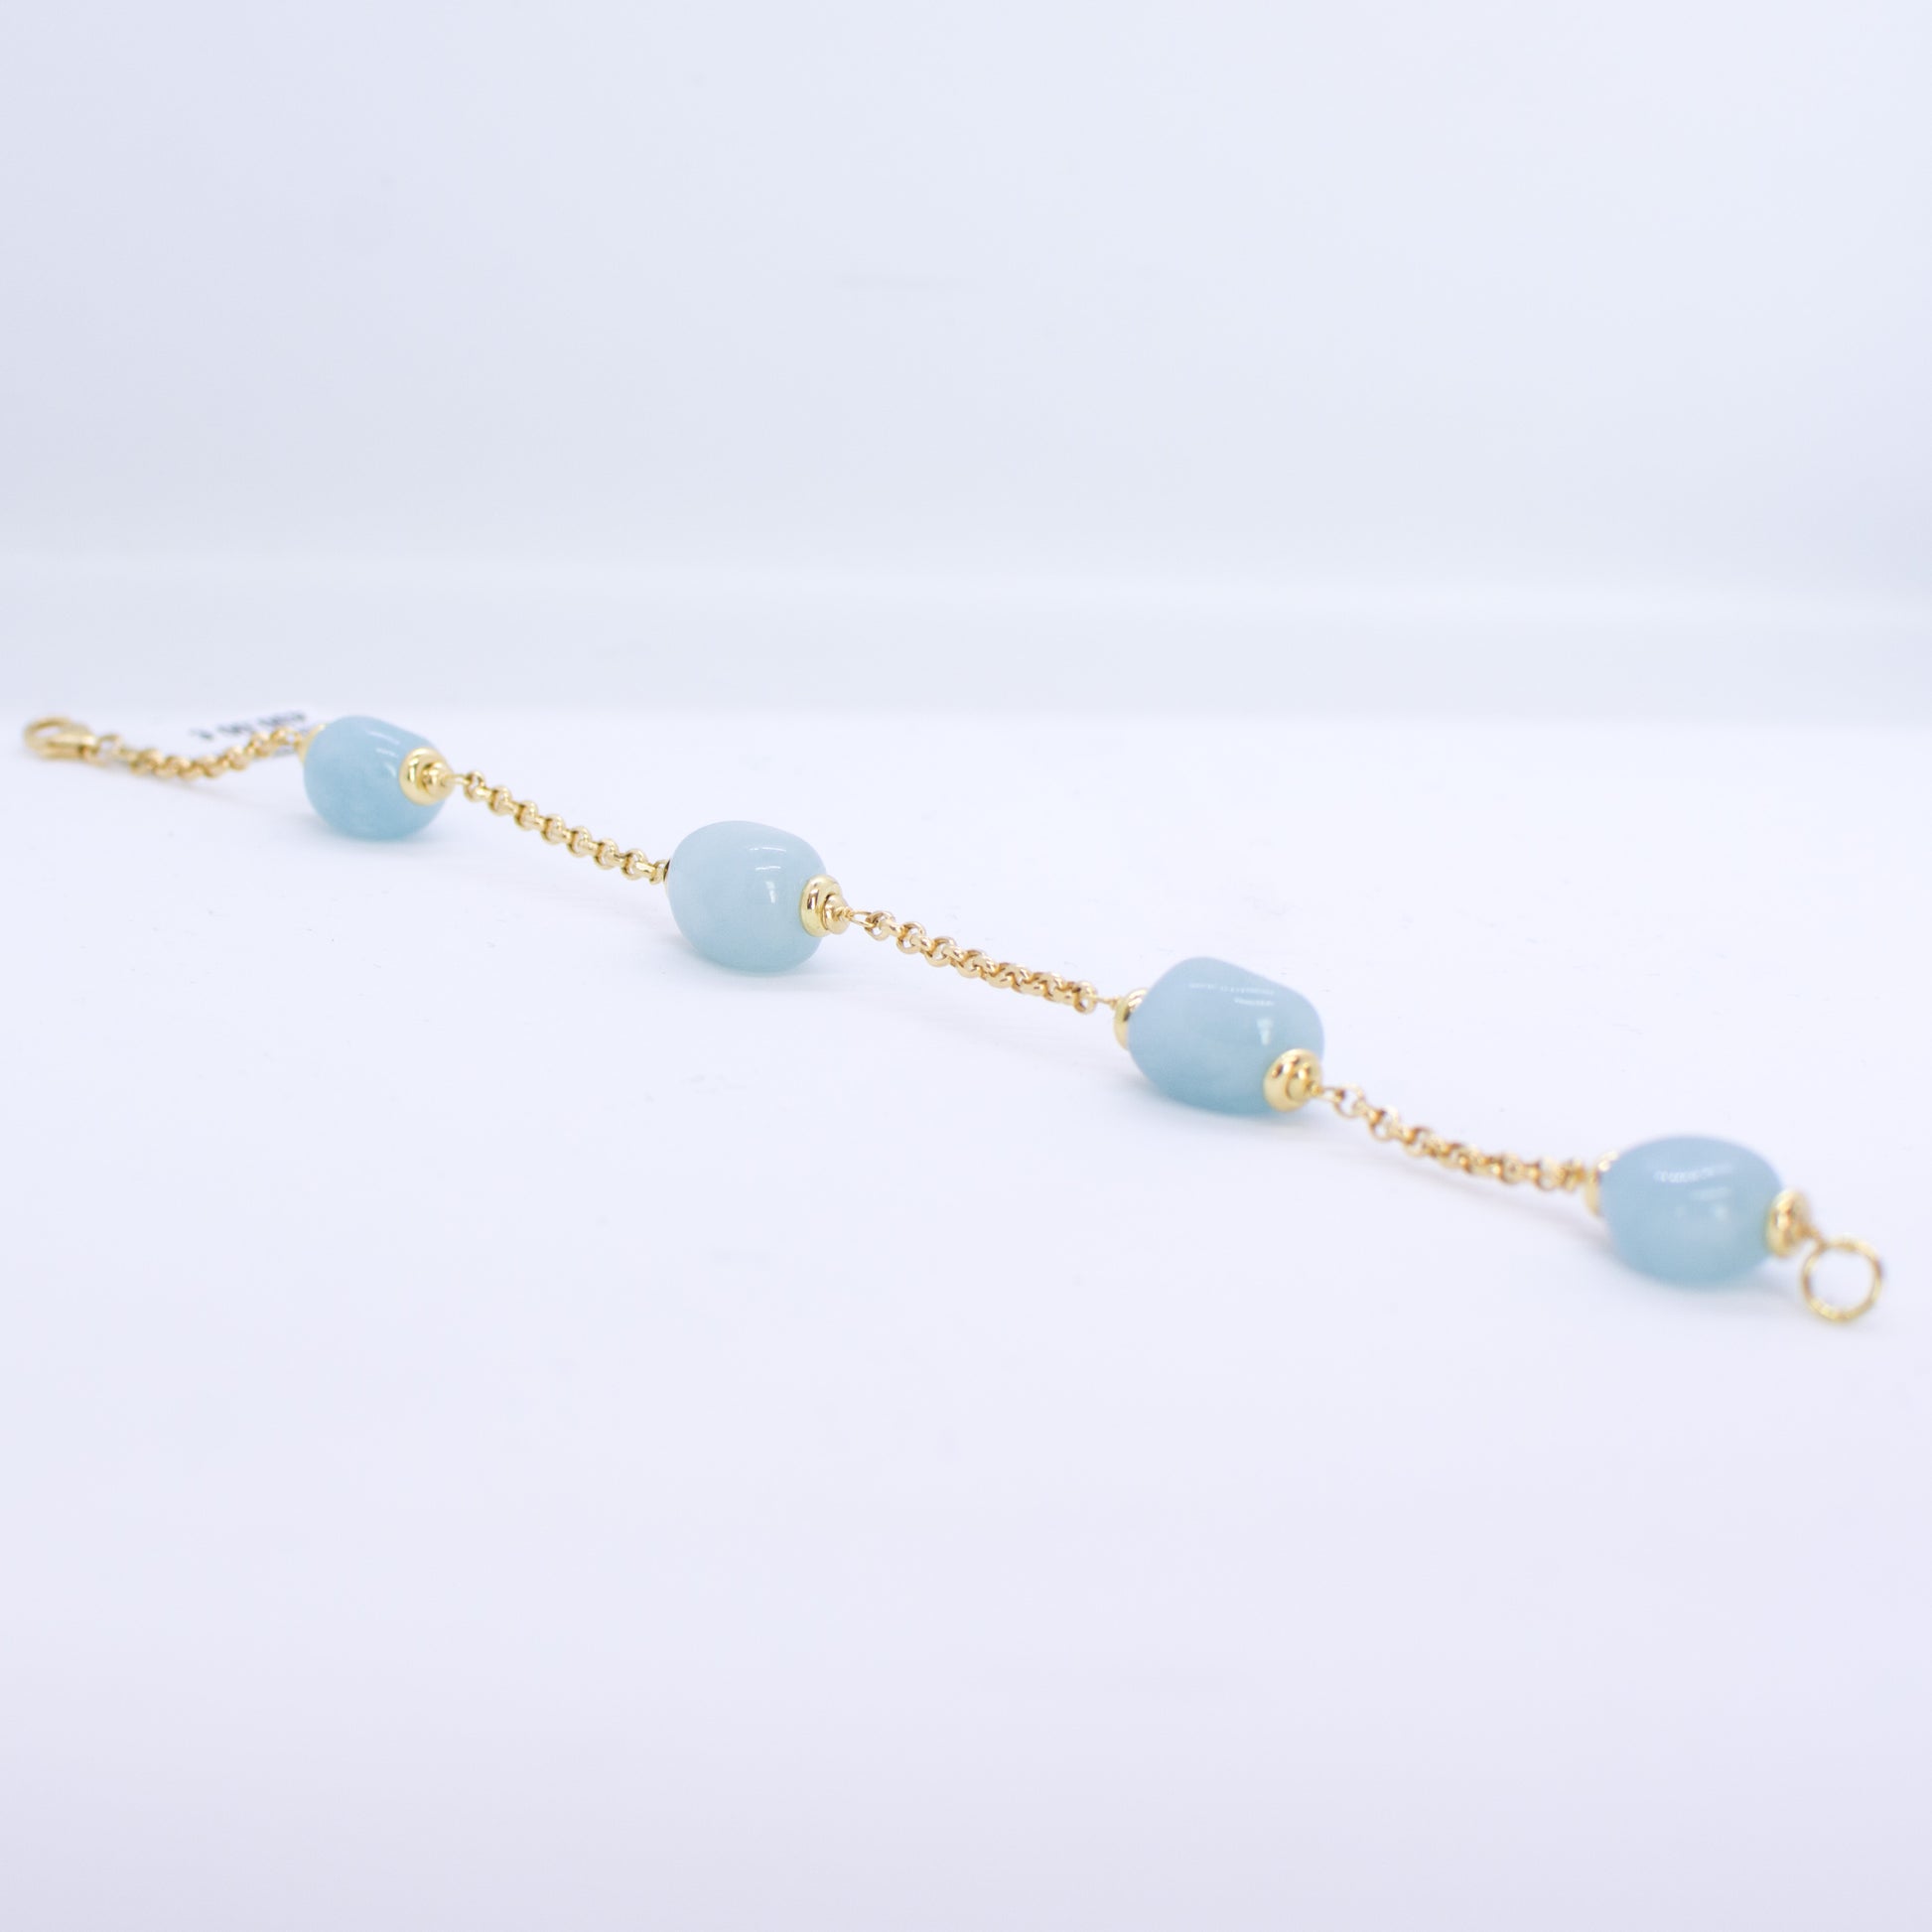 18ct Gold Silky Aquamarine and Chain Bracelet Aquamarine dimensions: 10mm x 12mm approximately Diamond cut 2mm gauge solid trace chain 19cm long 18ct yellow gold This item can be ordered in a variety of lengths.  Please contact us for custom requirements.